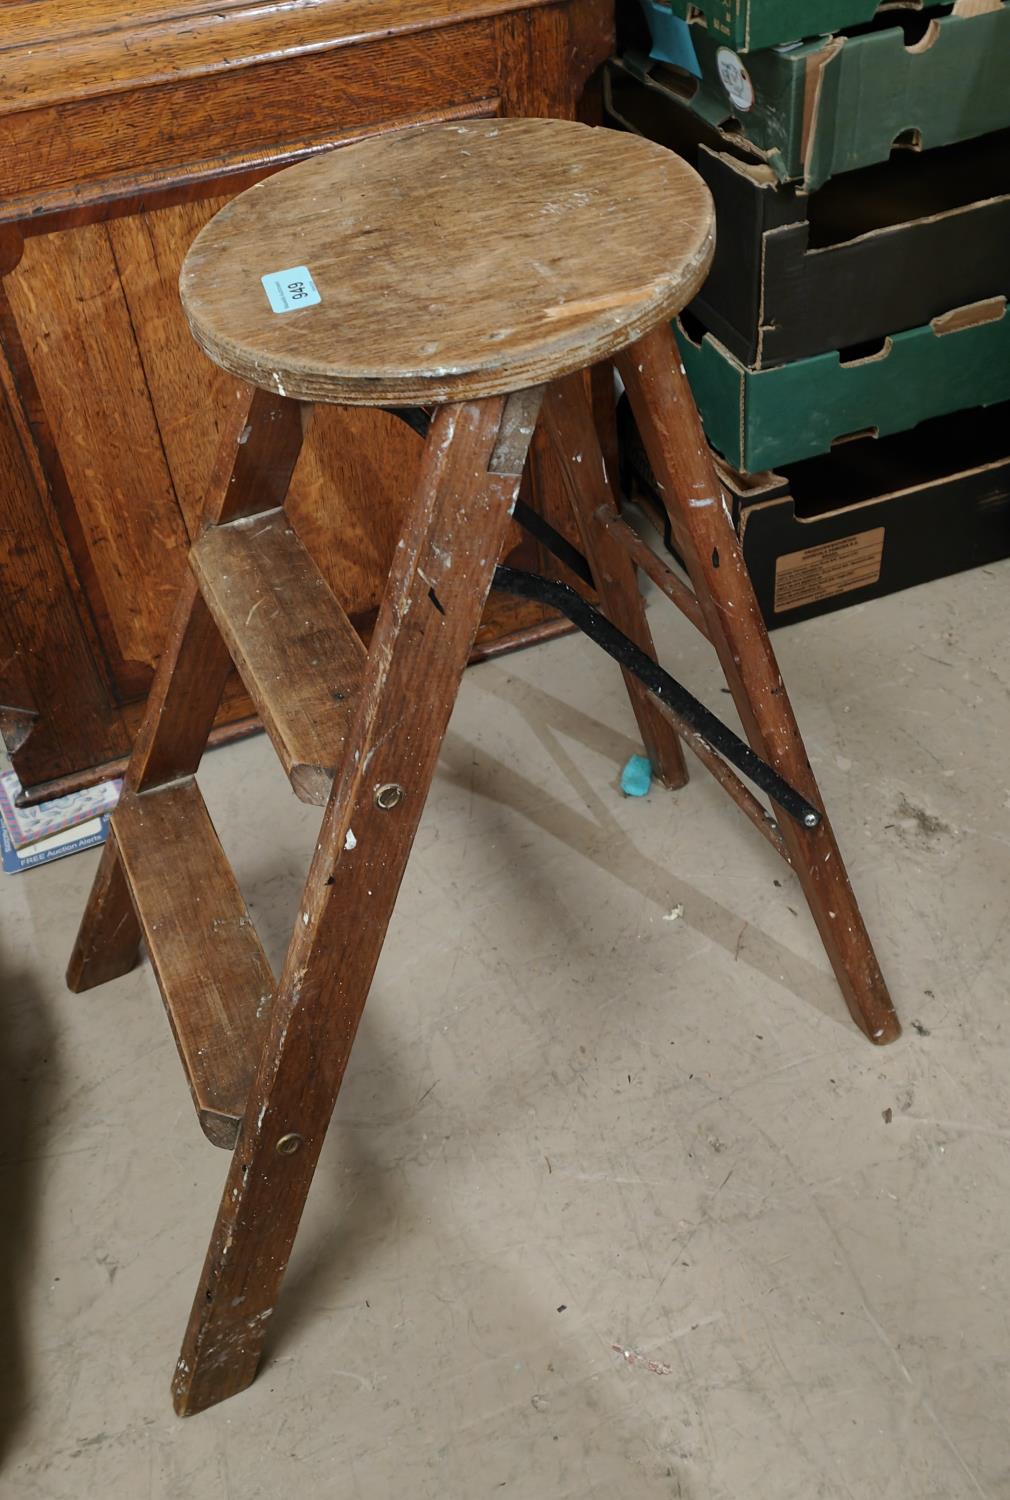 A vintage library stool.